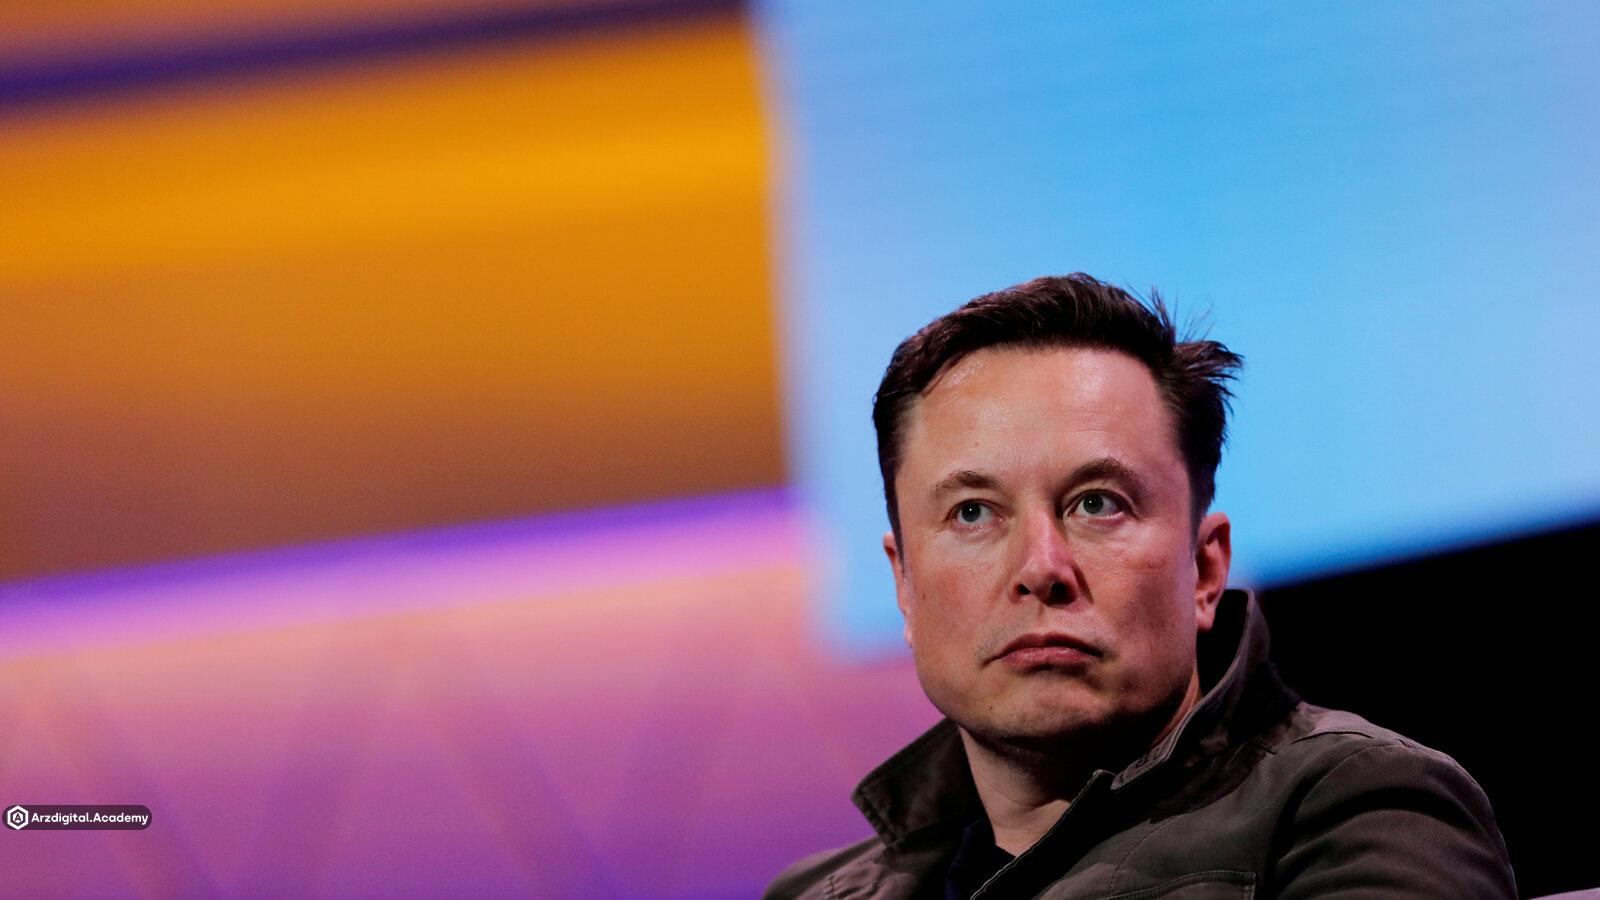 Elon Musk will not hold any position on the Bitcoin Mining Council: